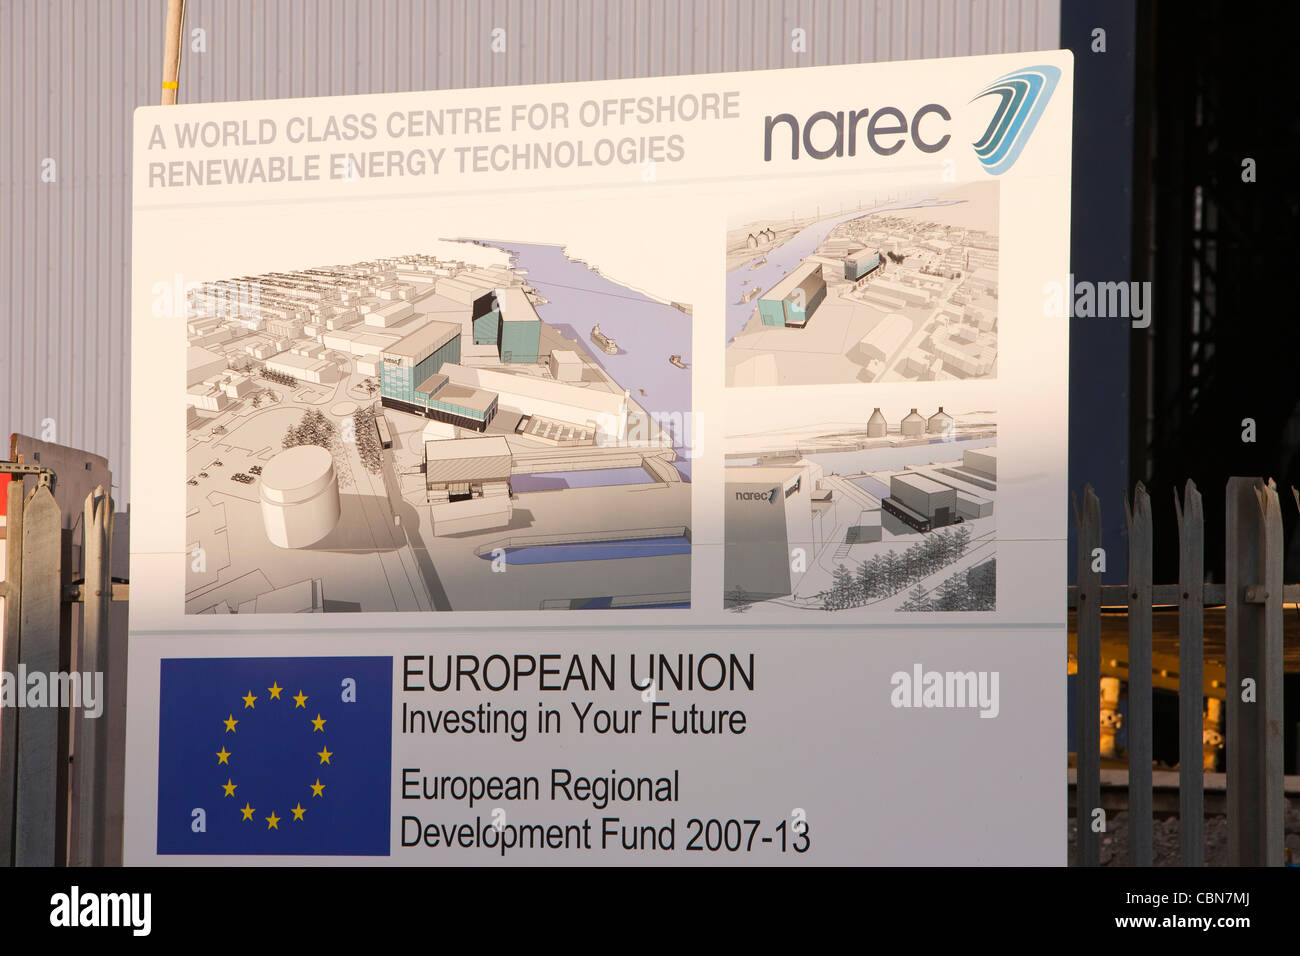 NAREC, a research and testing centre for renewable energy in Blyth, Northumberland, UK. Stock Photo